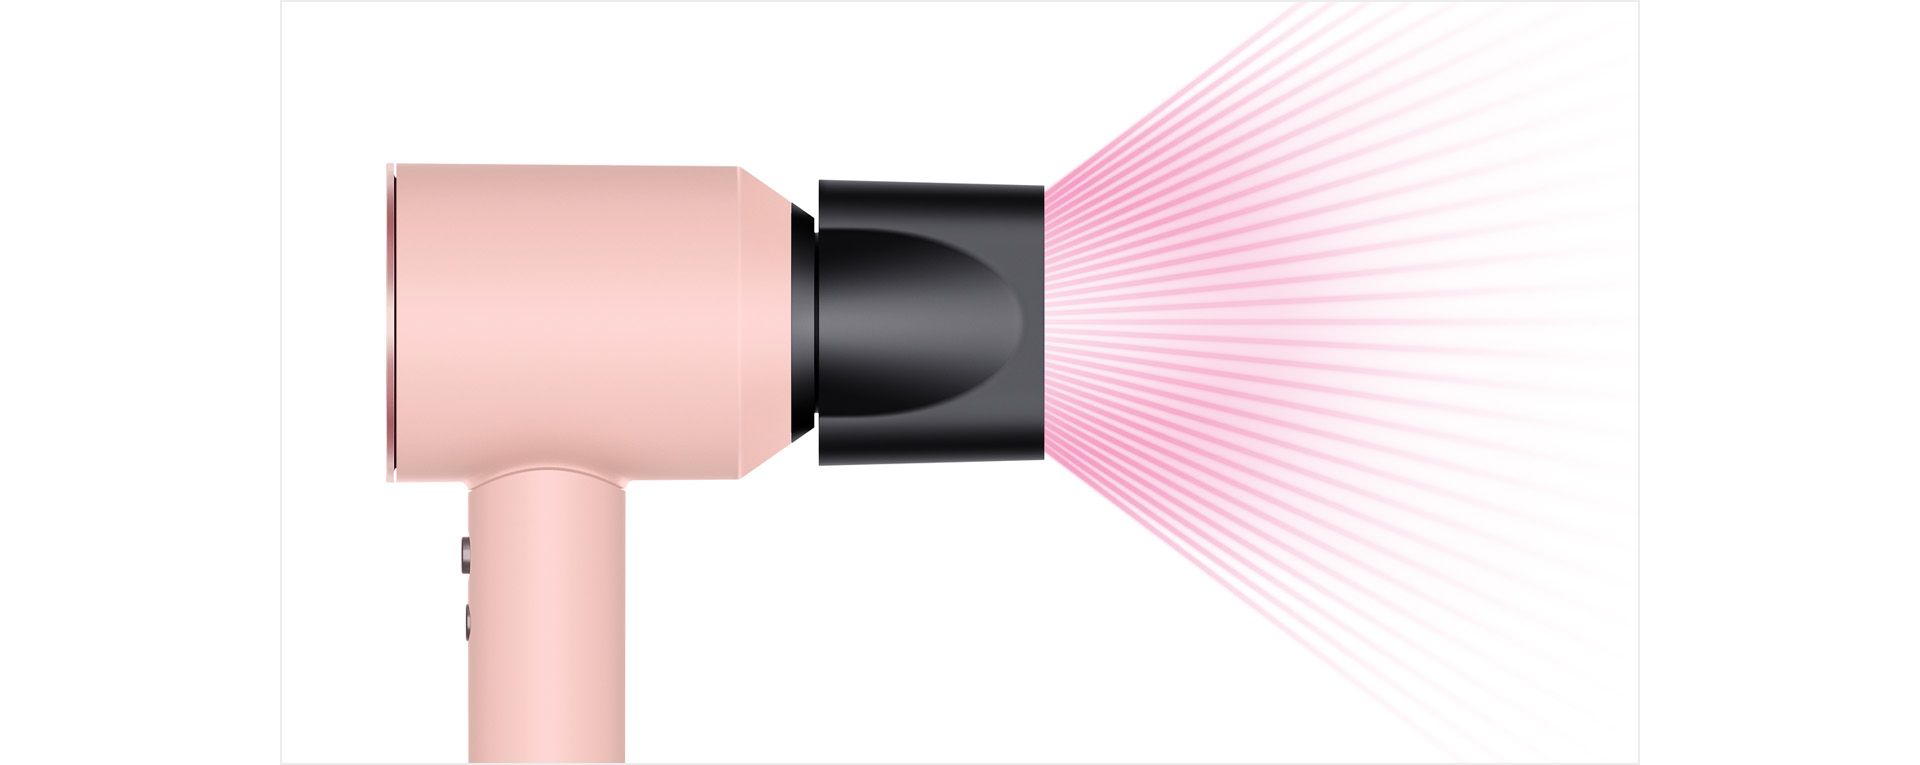 Dyson Supersonic™ Origin hair dryer Sakura/Rose Gold with Smoothing Nozzle attached